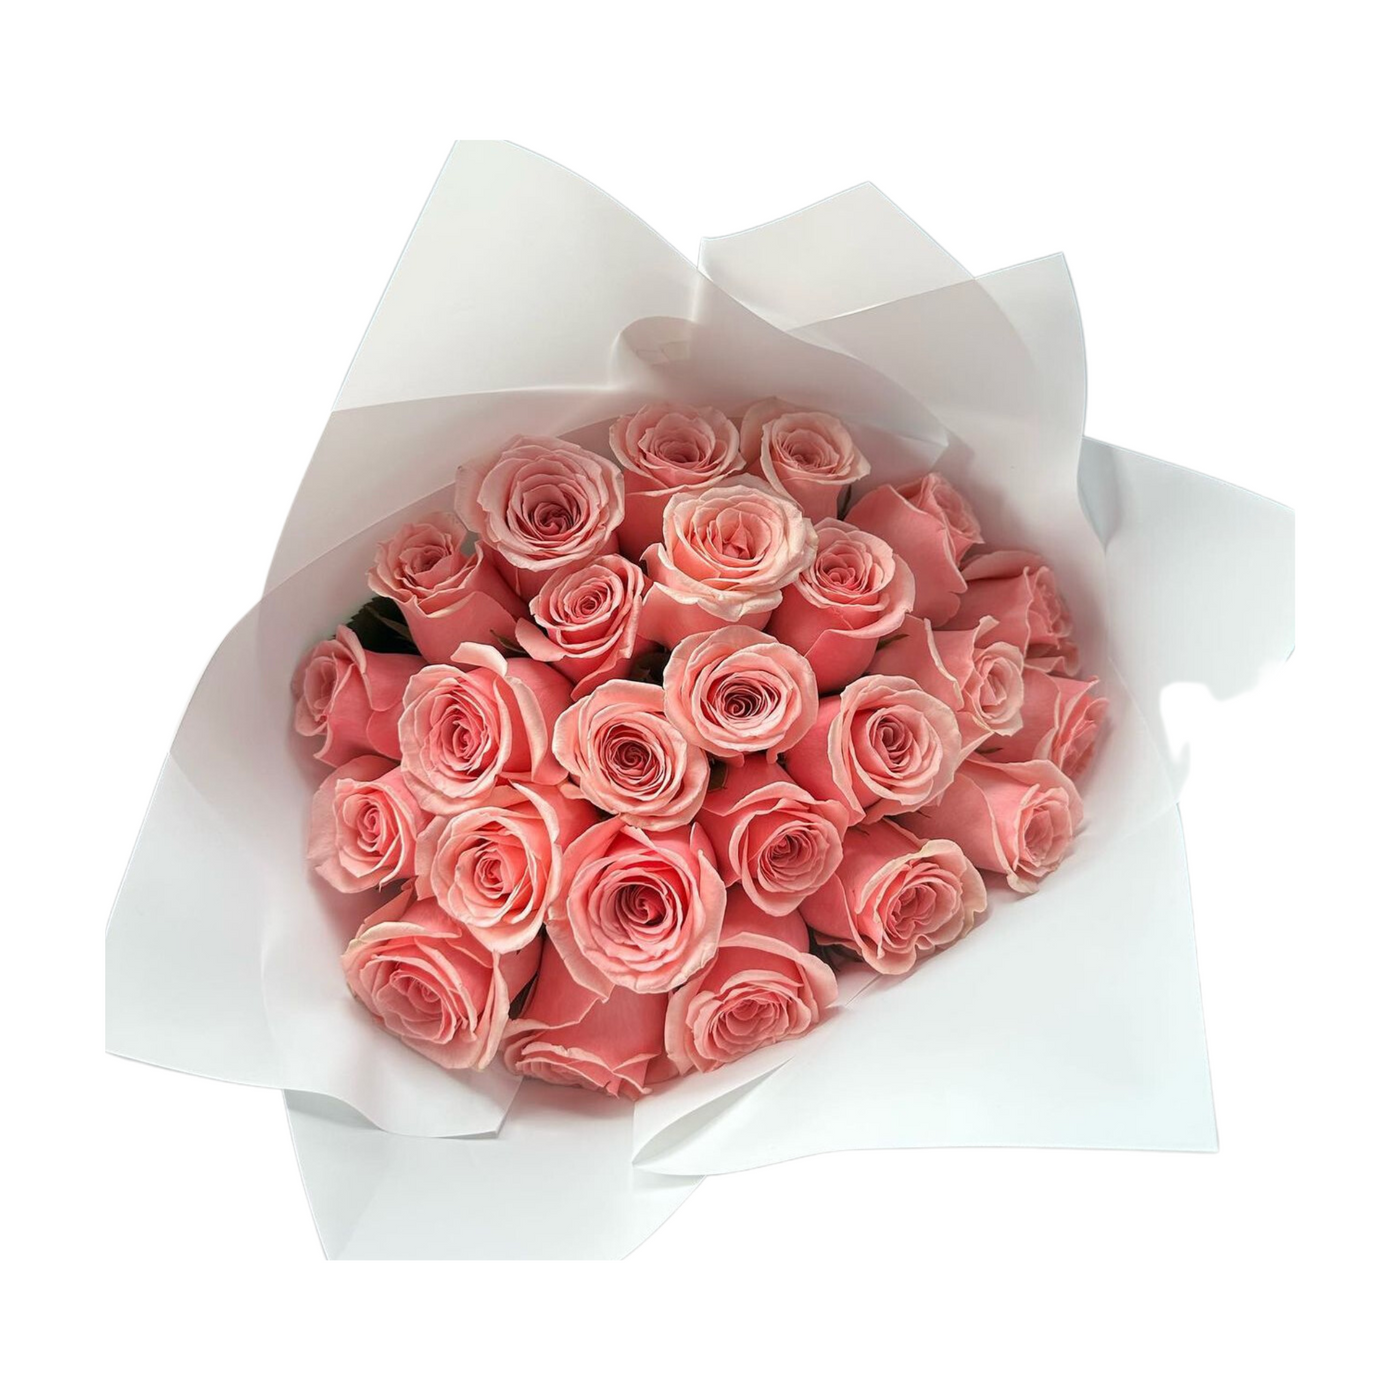 25 Pink Roses Bouquet